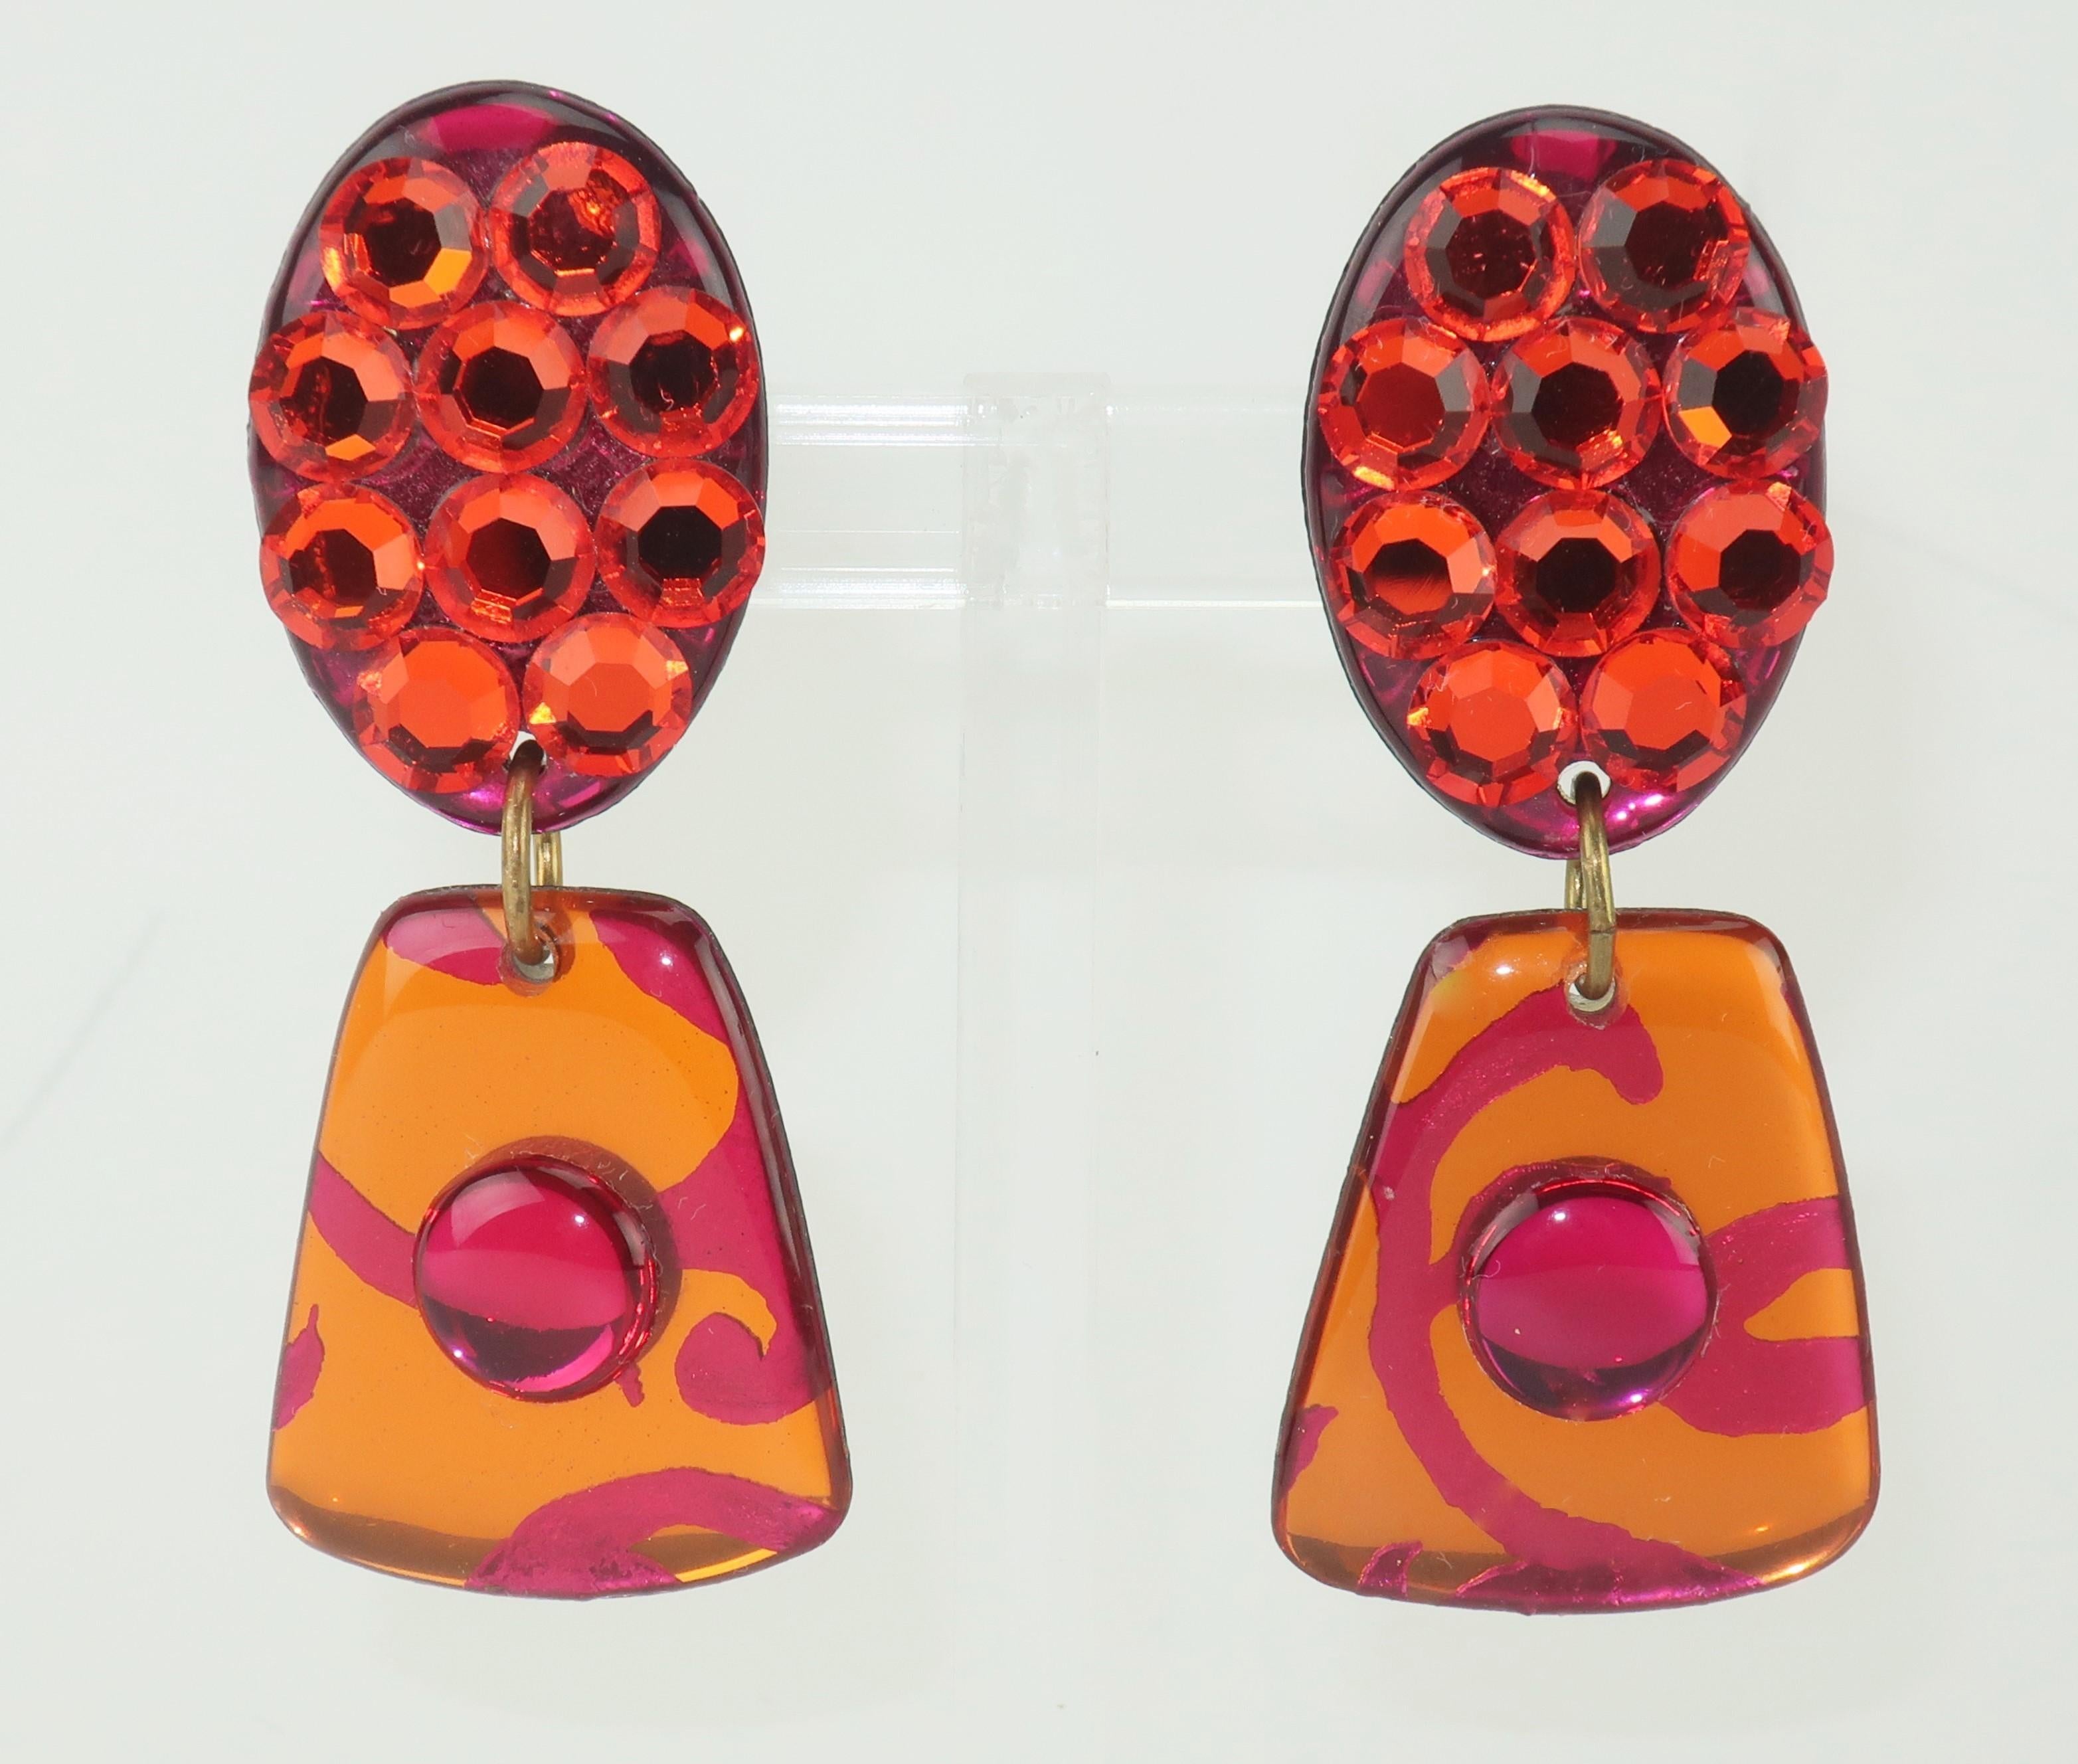 1980's hot pink and orange pave crystal clip on dangle earrings with a fun and frivolous look perfect for a pop of sparkle and color.  No maker’s mark.
CONDITION
Good to fair condition with an abrasion at the back of one earring shown in photograph